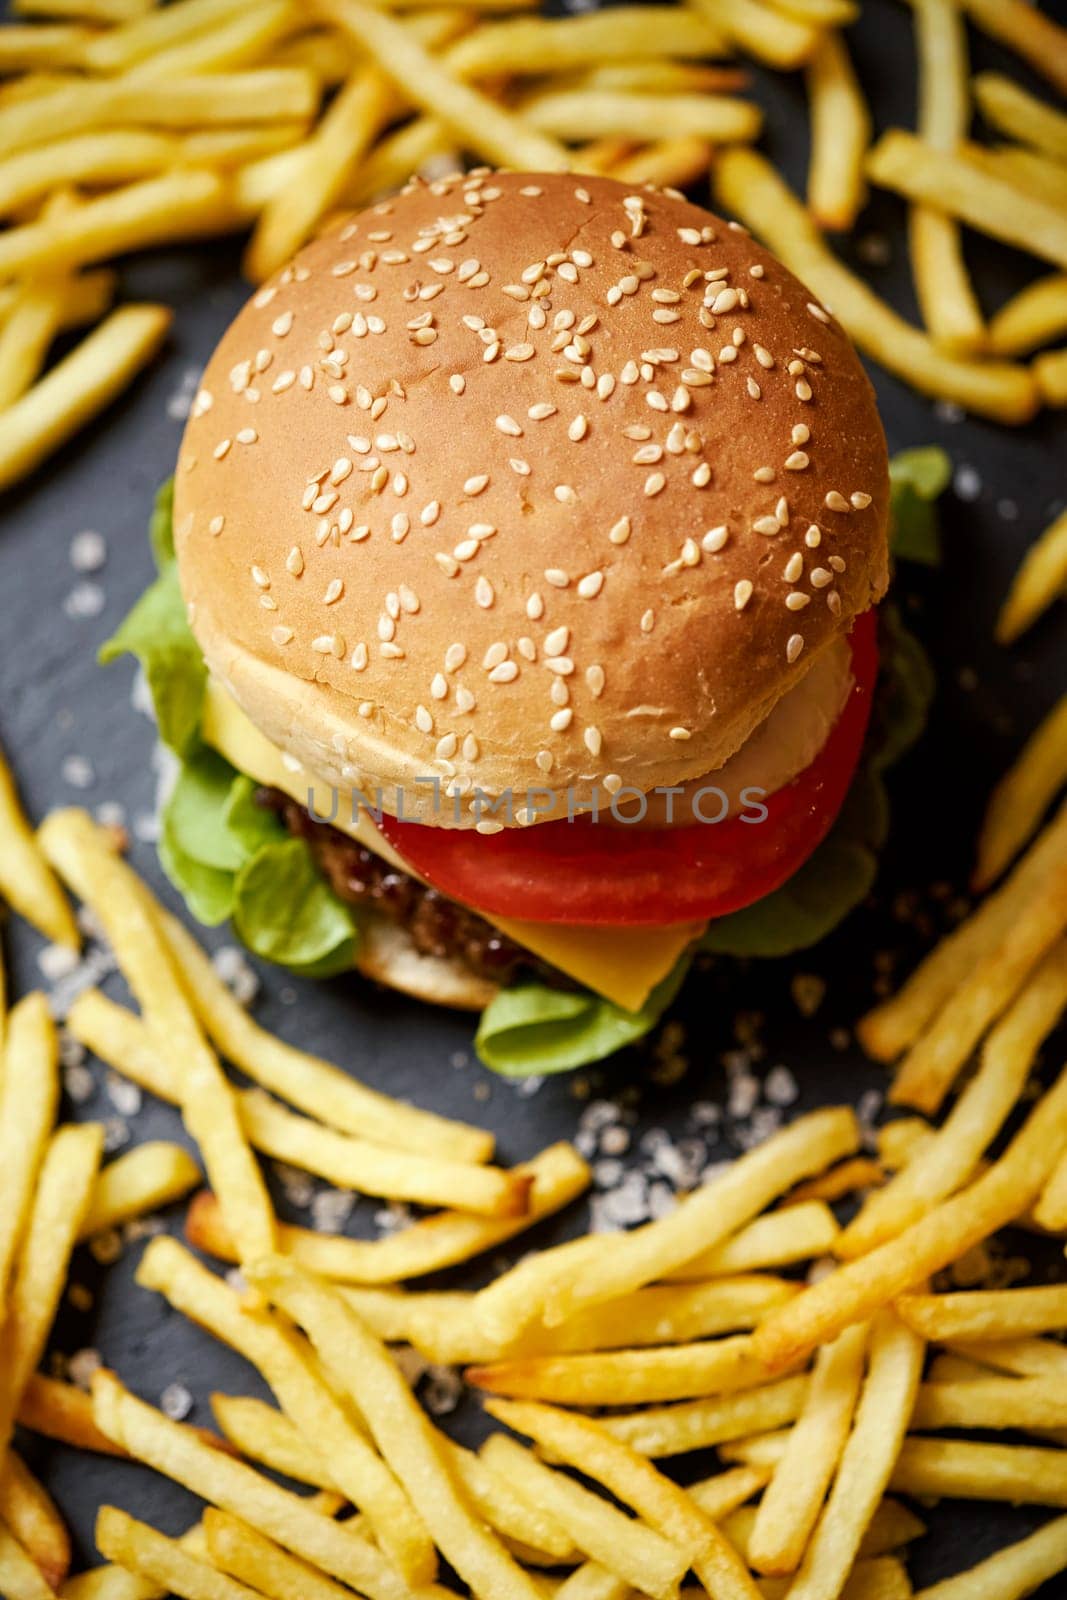 cheeseburger surrounded by french fries on a black table by superstellar